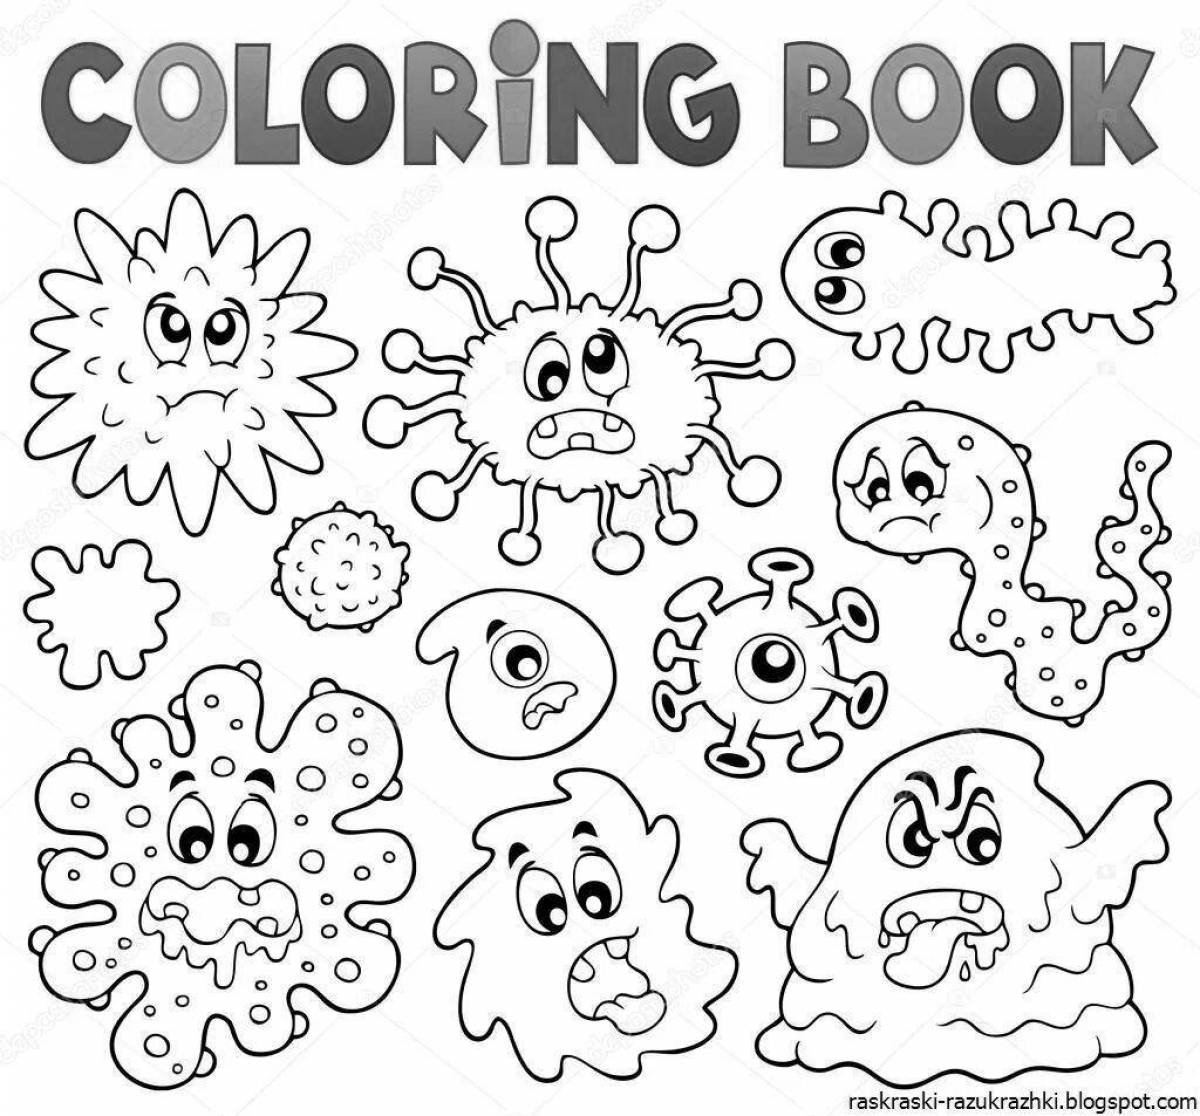 Coloring page funny viruses and microbes